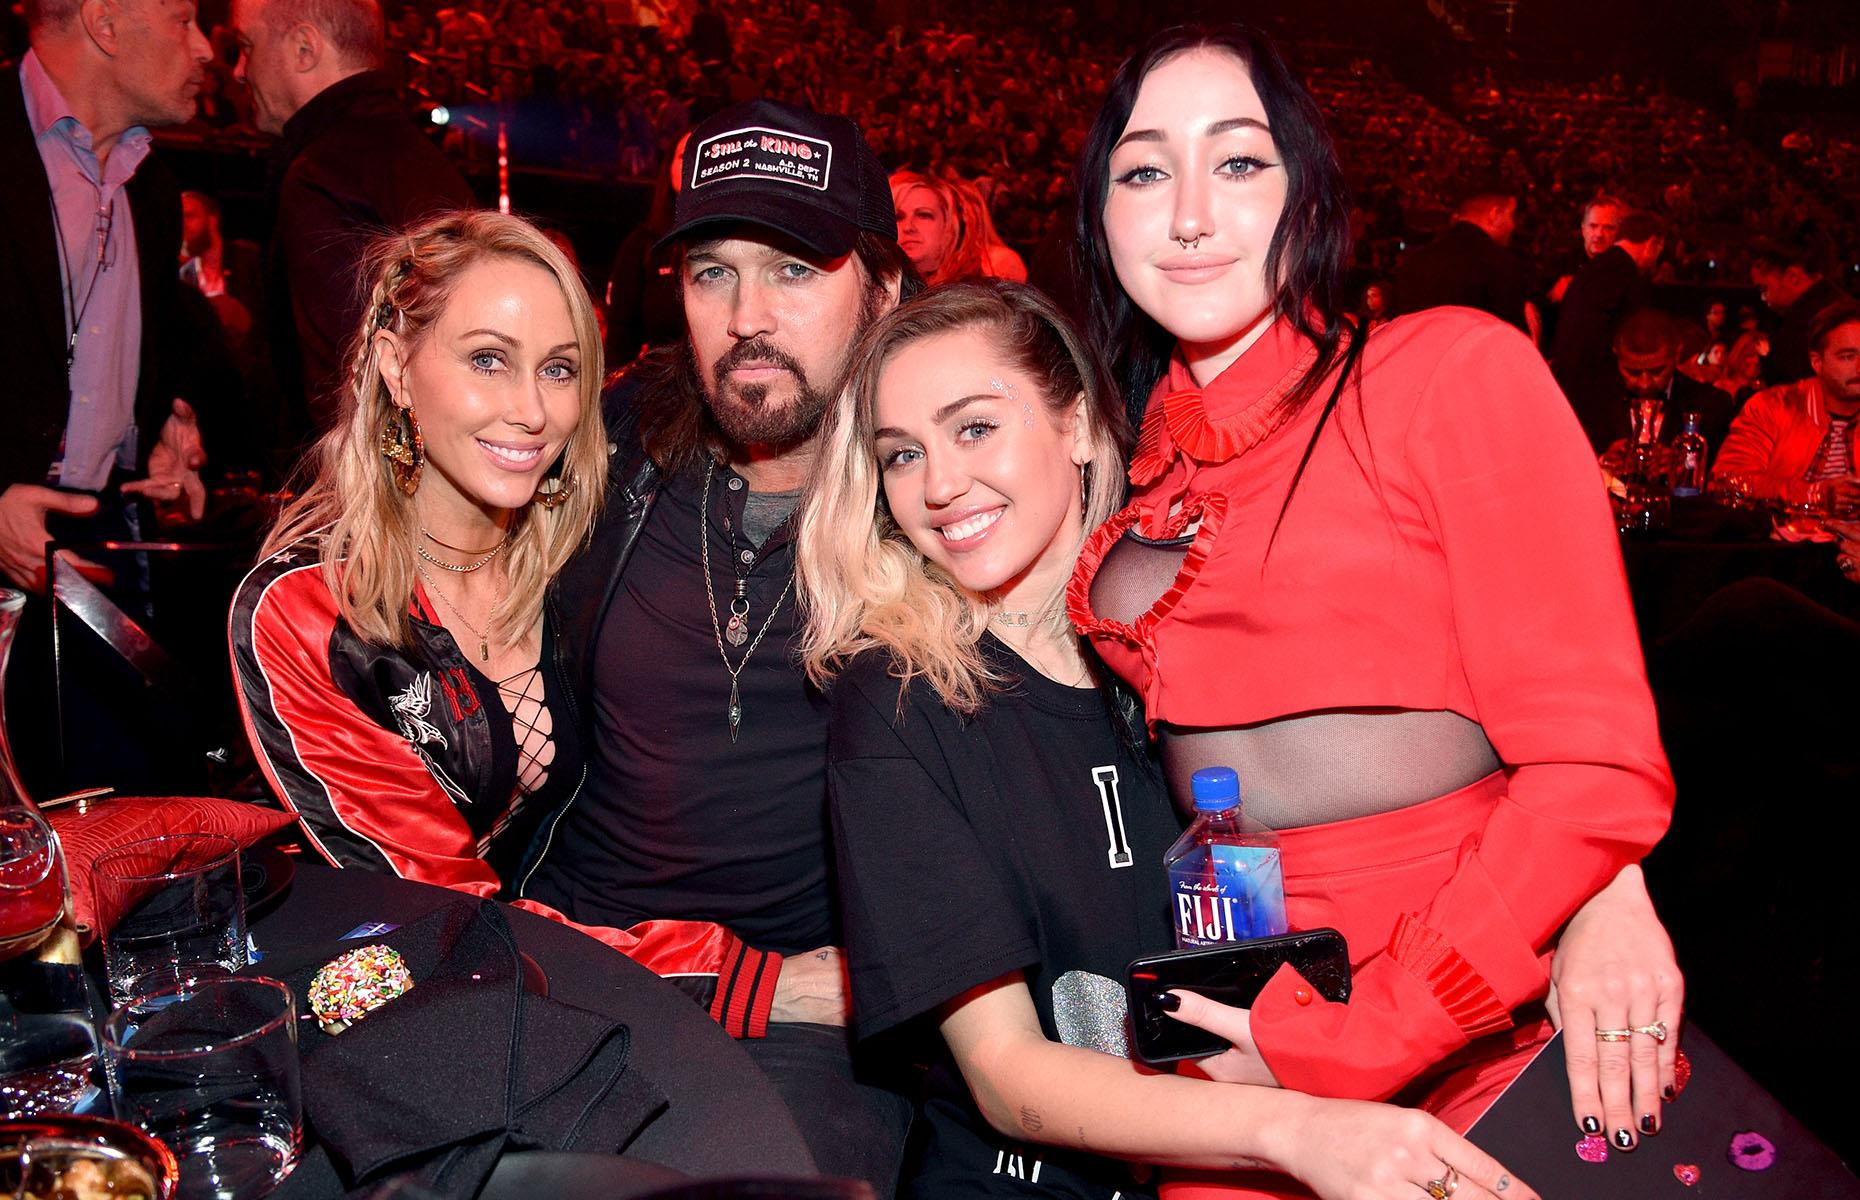 Miley Cyrus Compares Her and Billy Ray Cyrus' Relationships to Fame